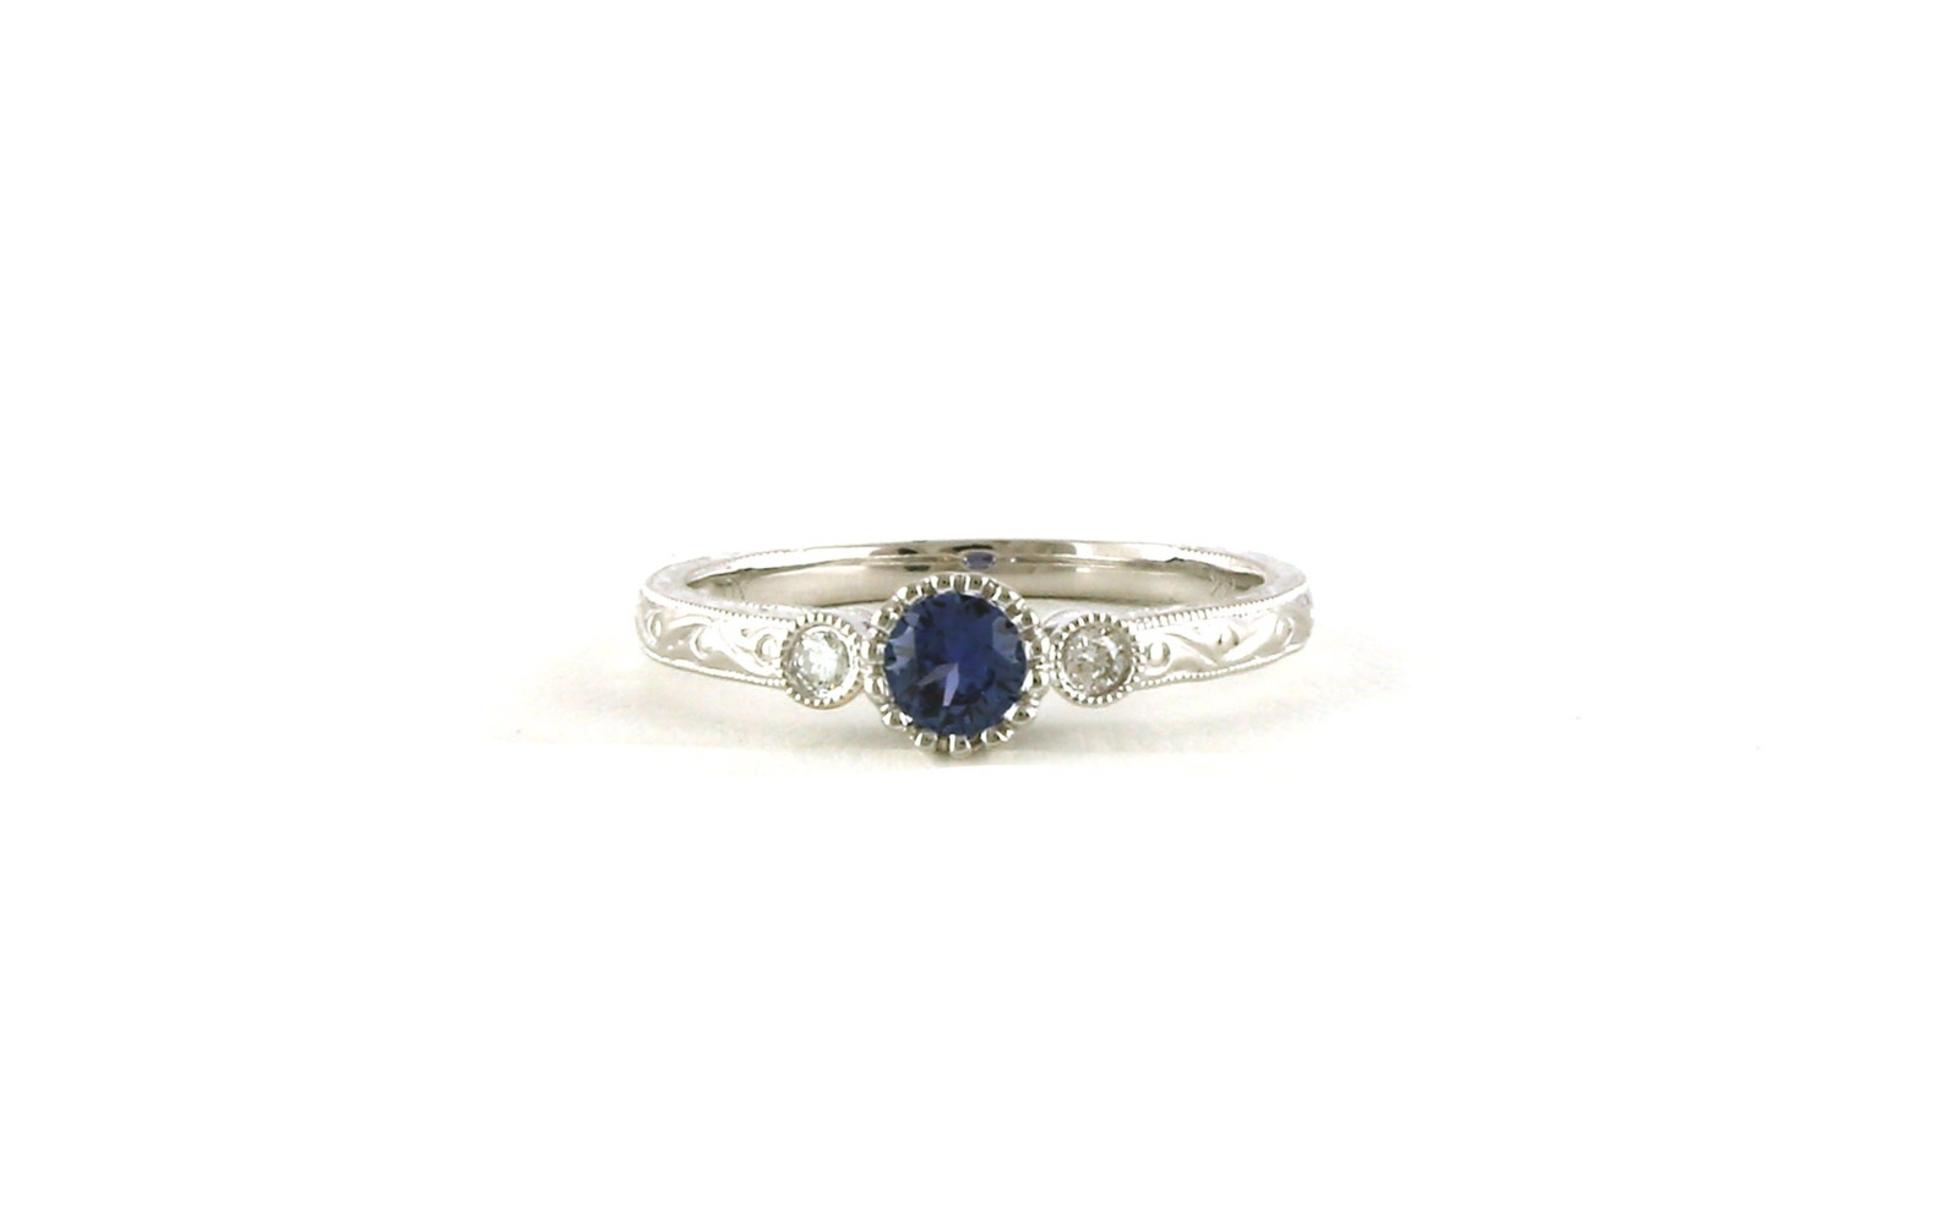 3-Stone Bezel-set Montana Yogo Sapphire and Diamond Ring with Hand Engraving and Milgrain Detail in White Gold (0.26cts TWT)